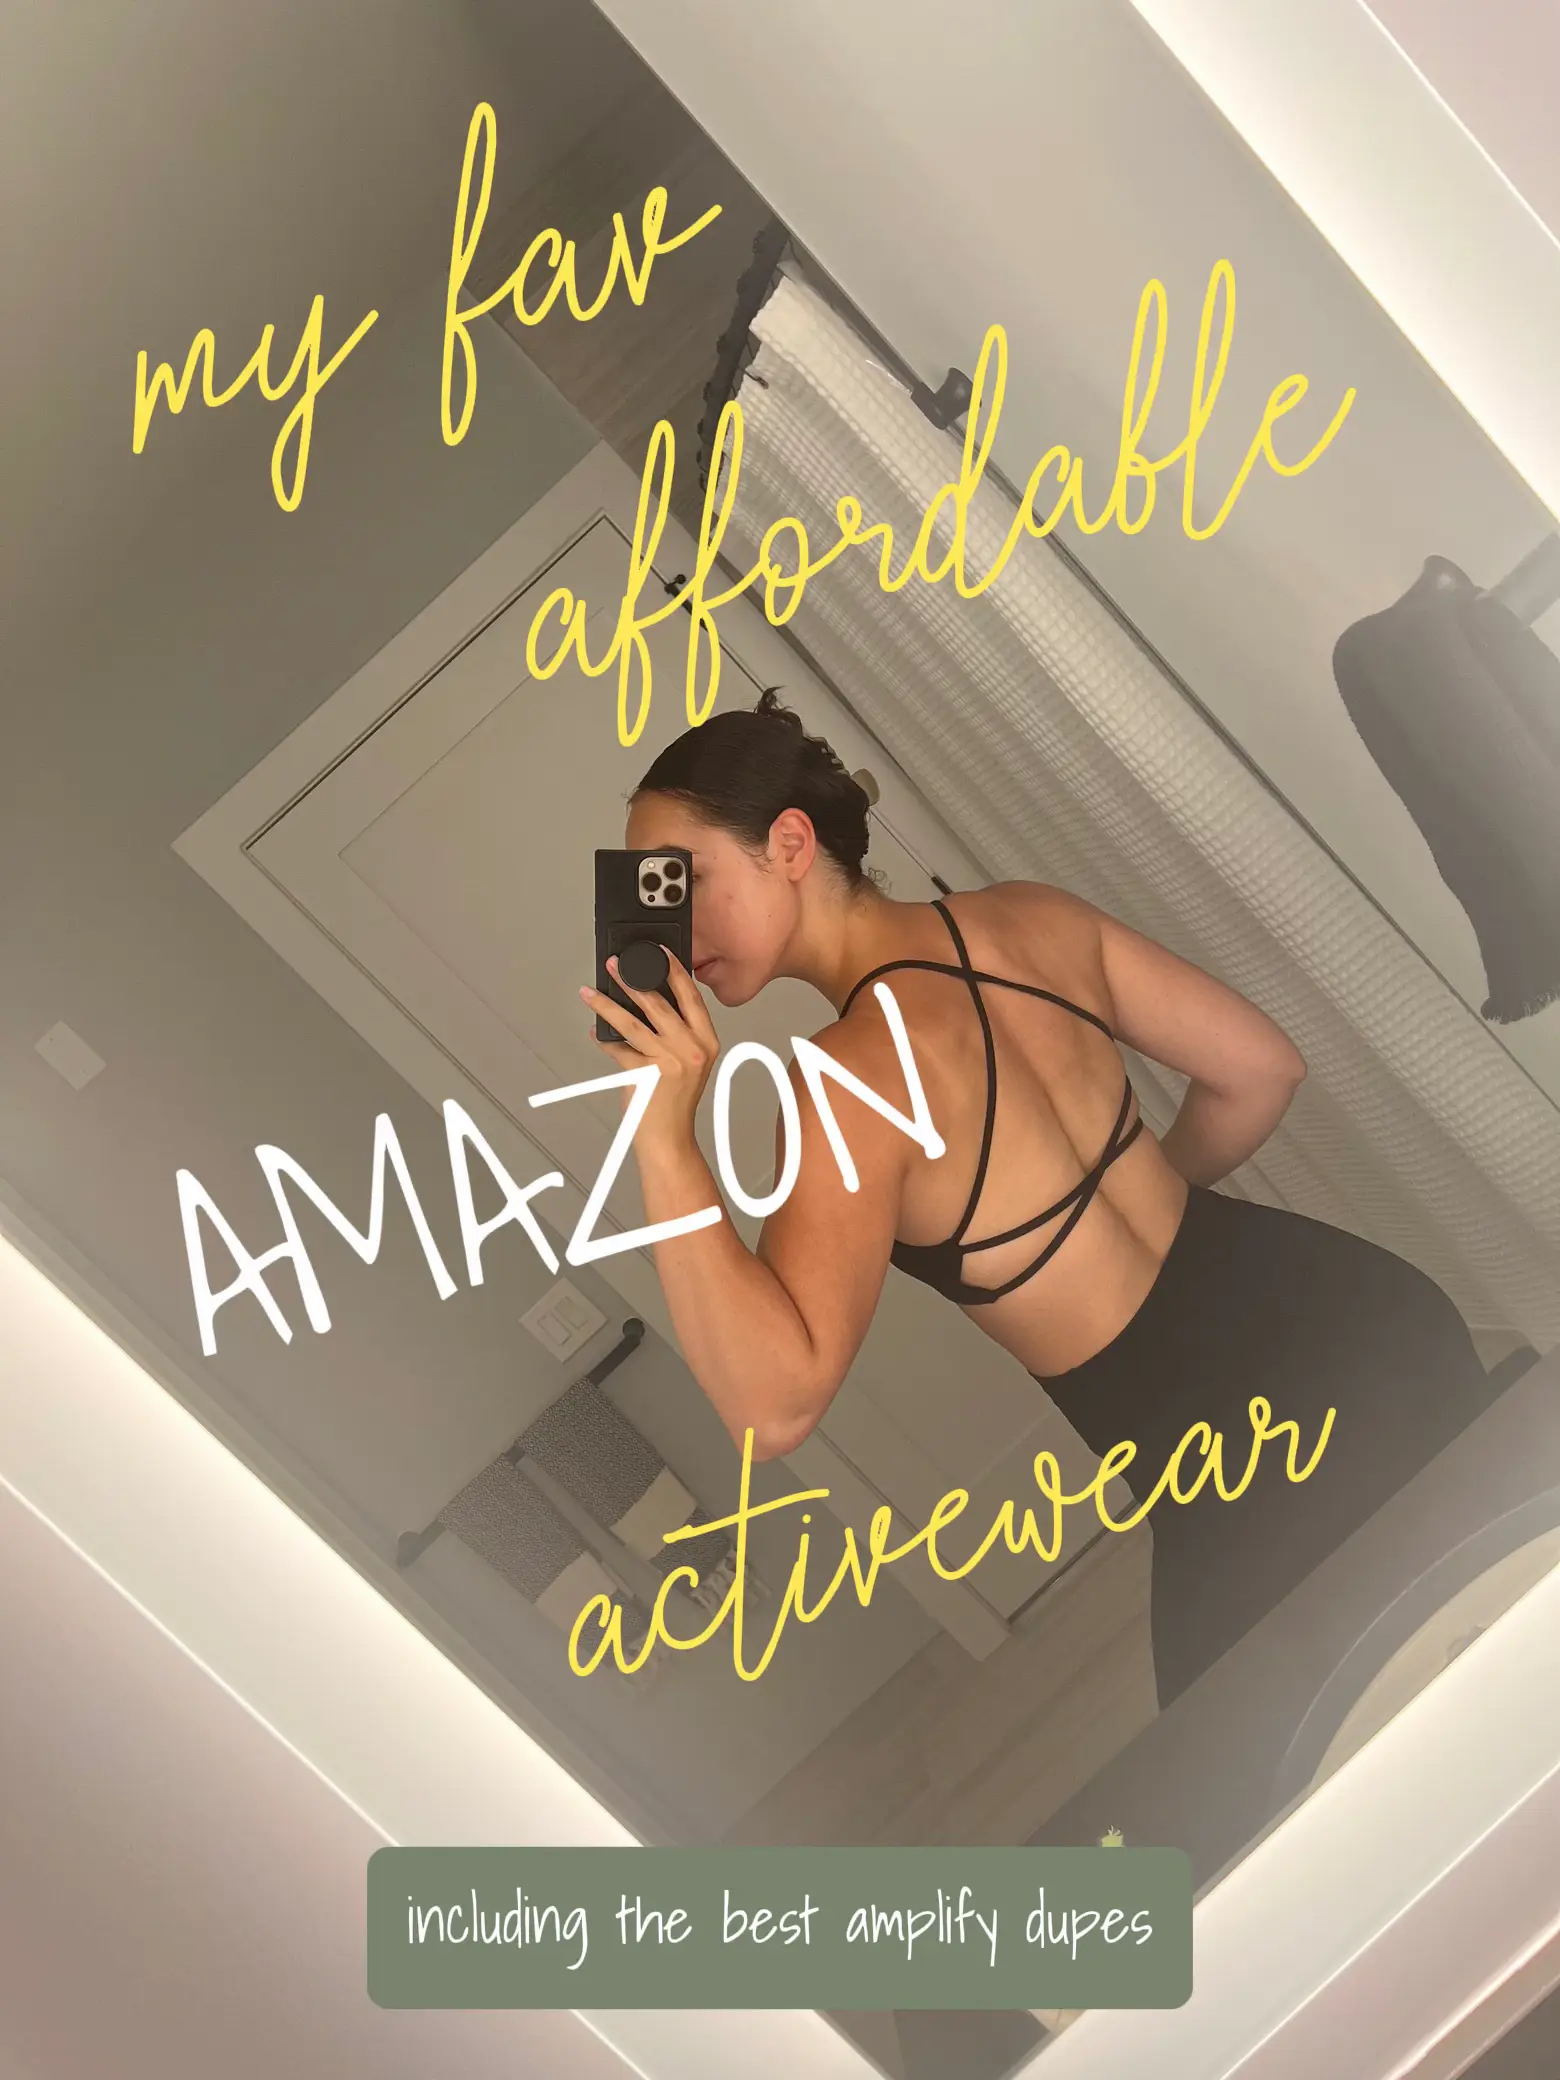 Activewear try on & review for Kamo Fitness! I personally adore these